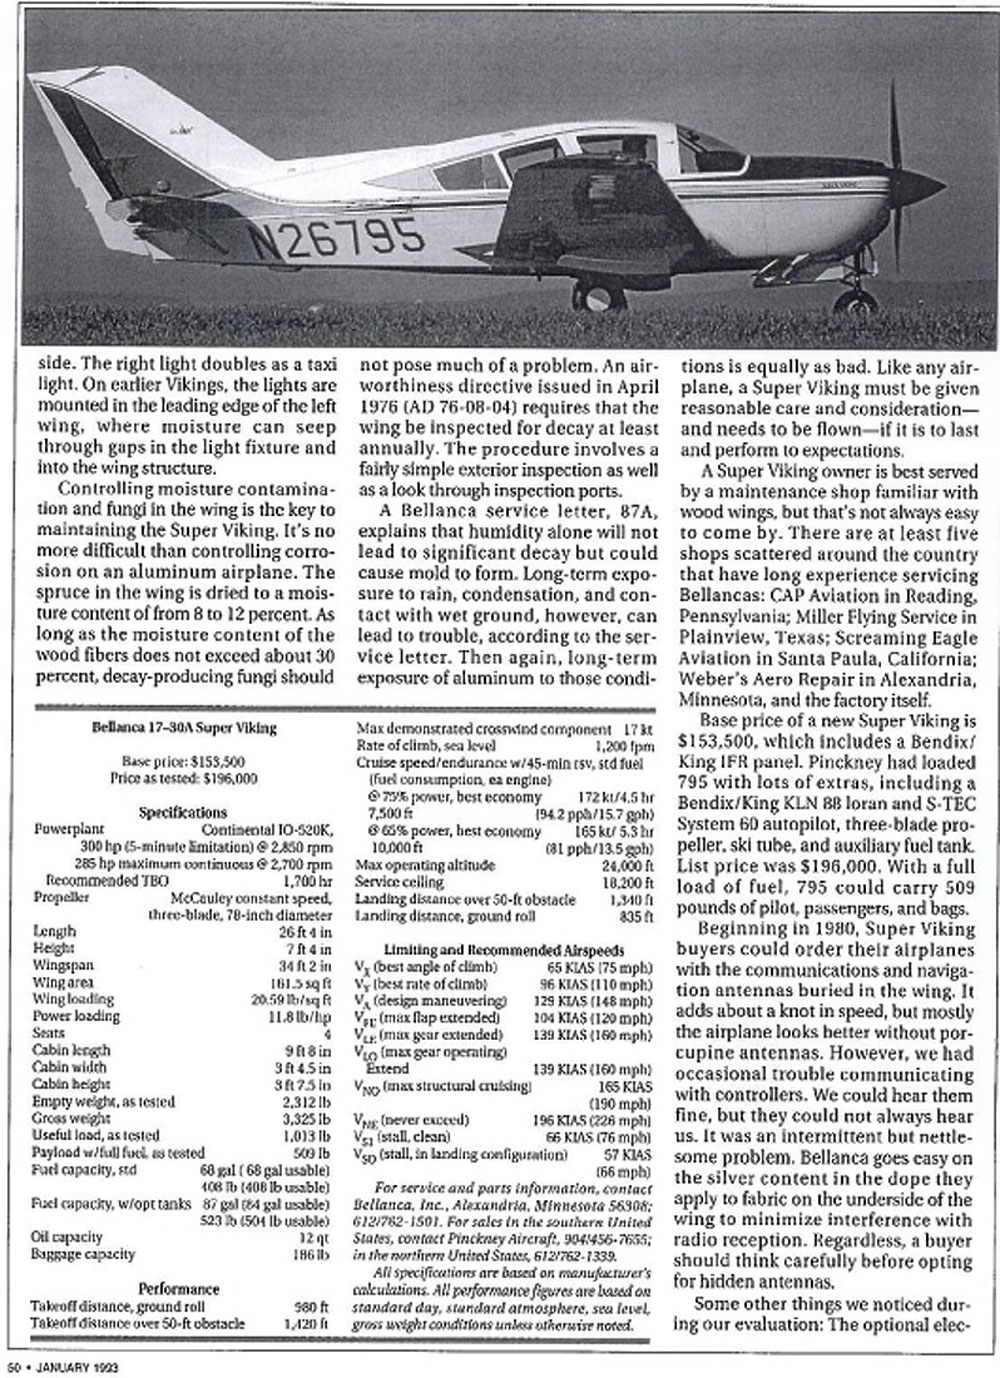 AOPA Article Page 5